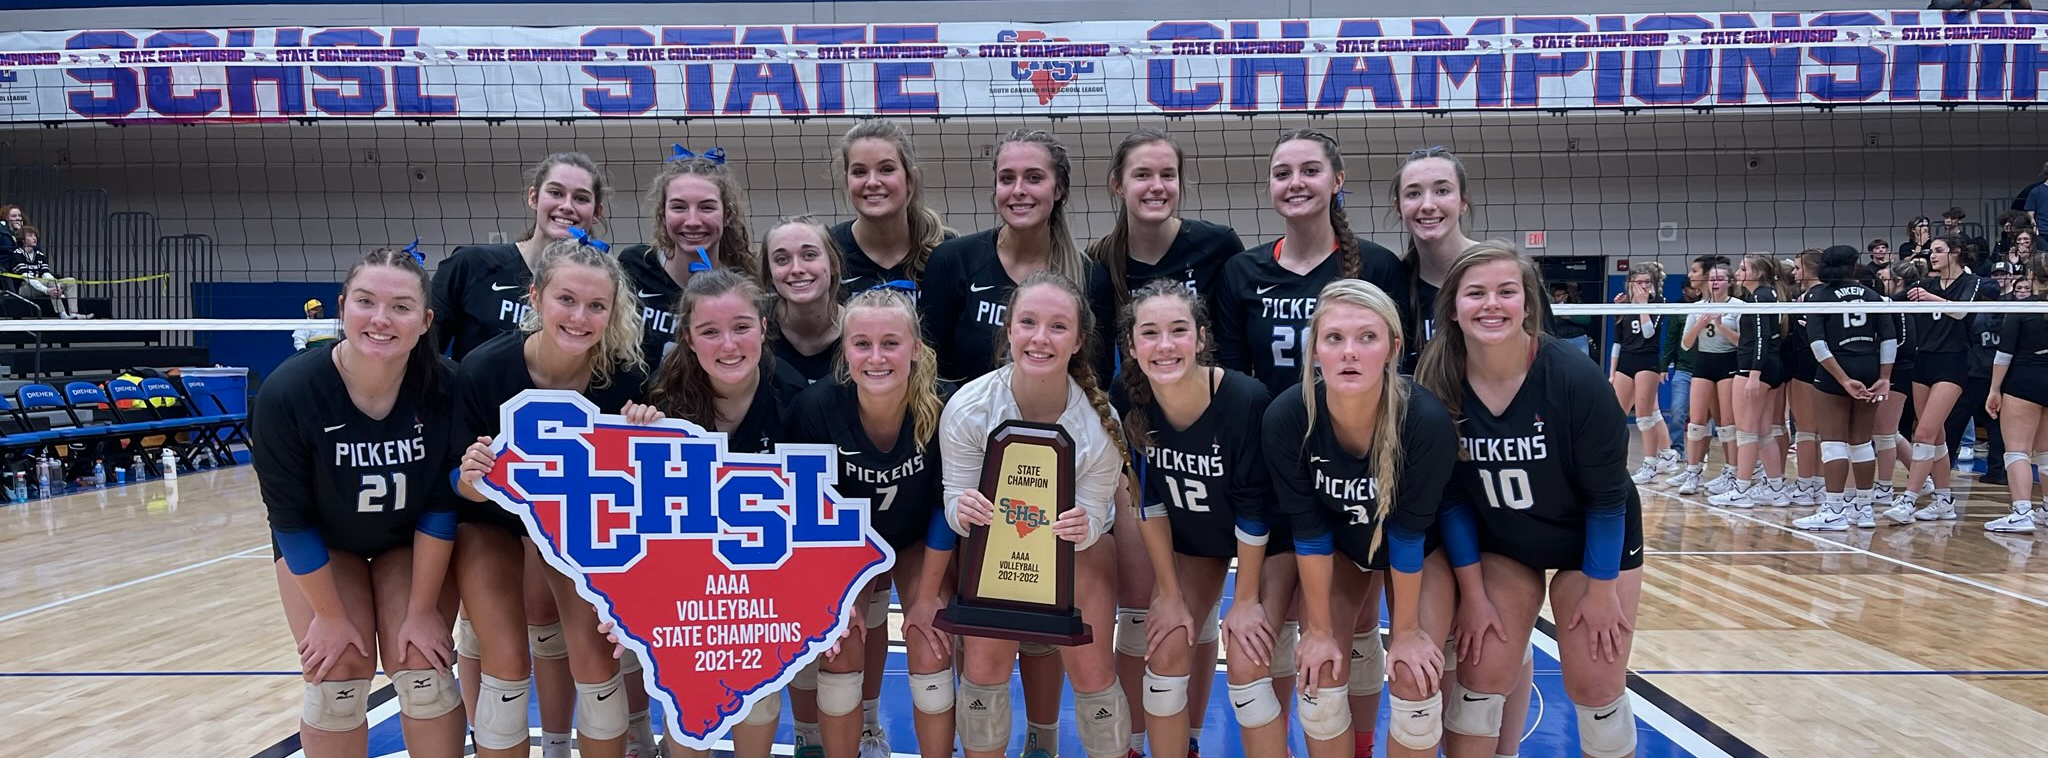 2021 State Volleyball Champions